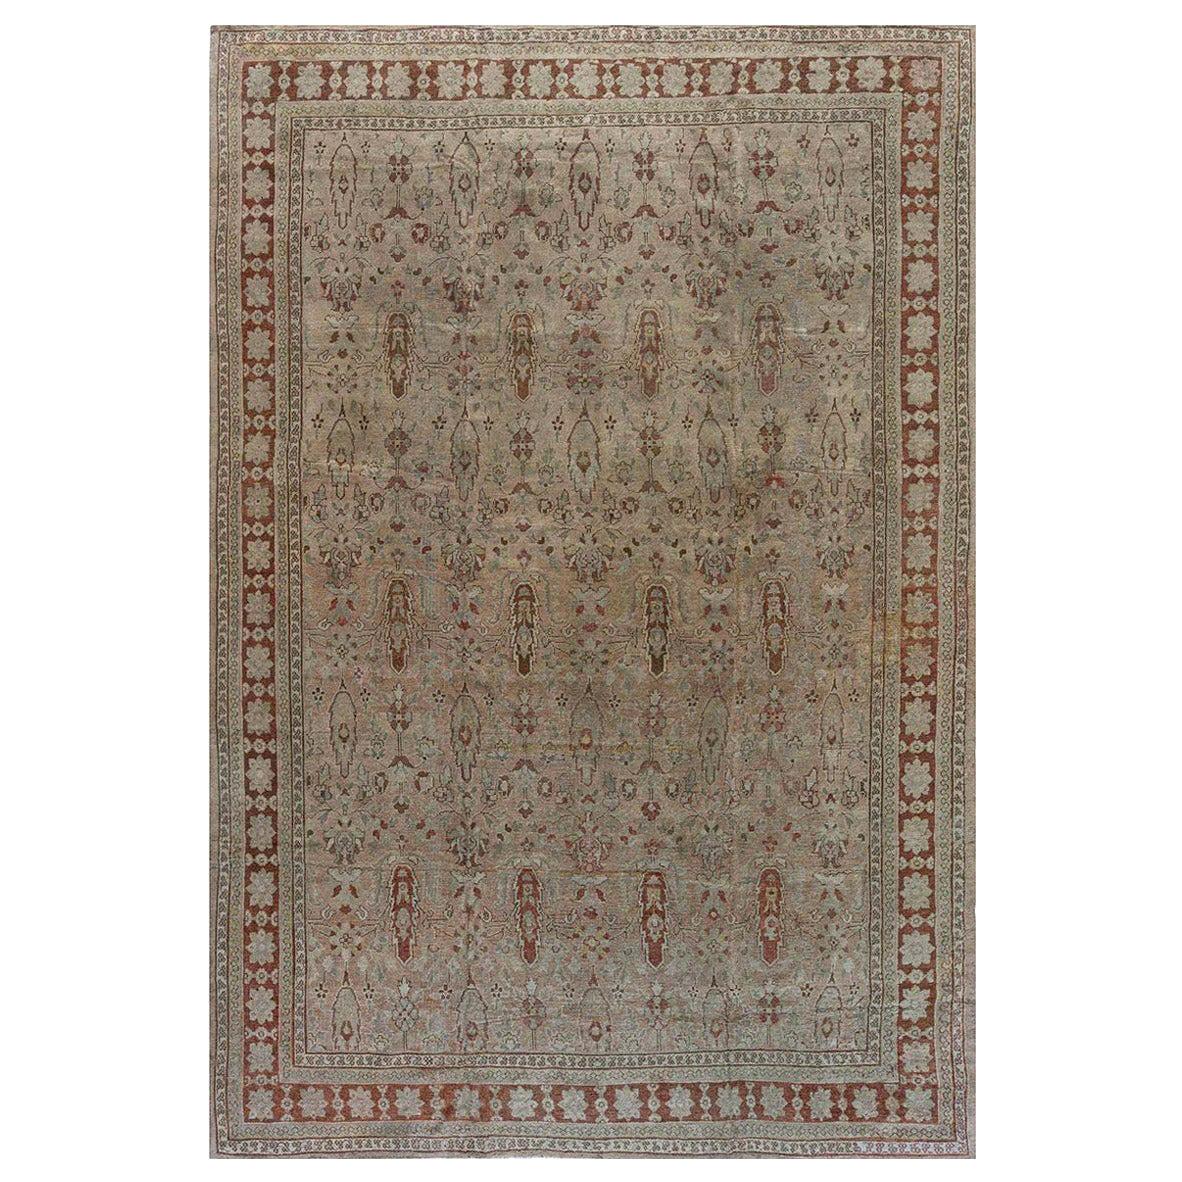 Authentic 19th Century Indian Amritsar Carpet For Sale